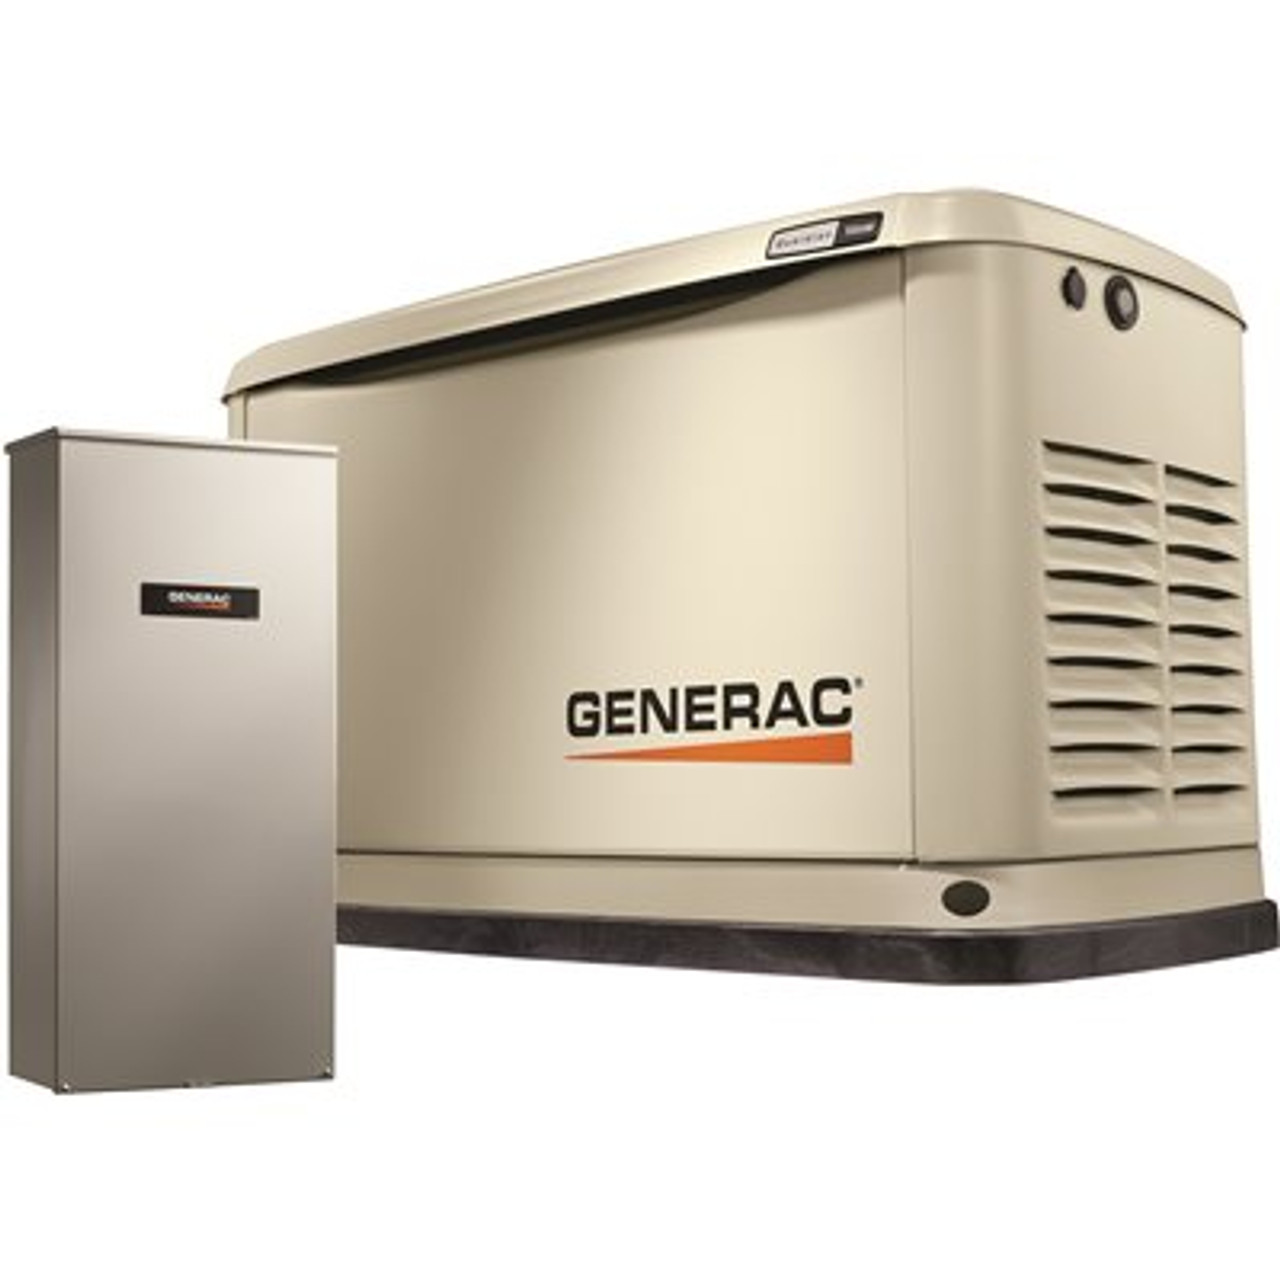 Generac Guardian 18,000-Watt (LP) / 17,000-Watt (NG) Air-Cooled Whole House Generator with Wi-Fi and 200-Amp Transfer Switch